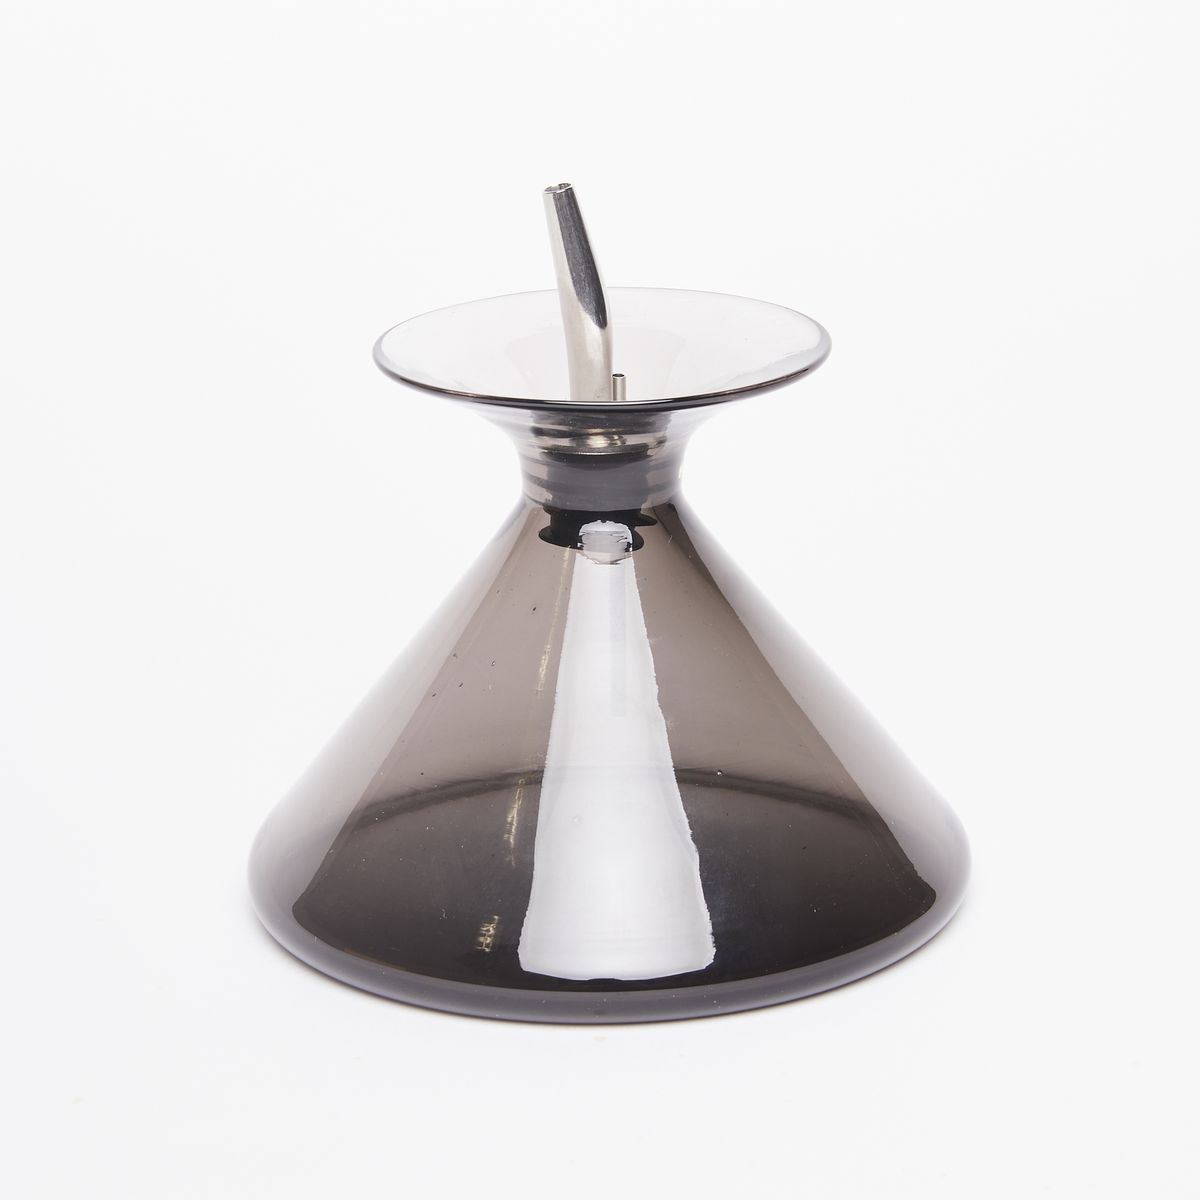 Dark grey clear glass cone with pour spout on top